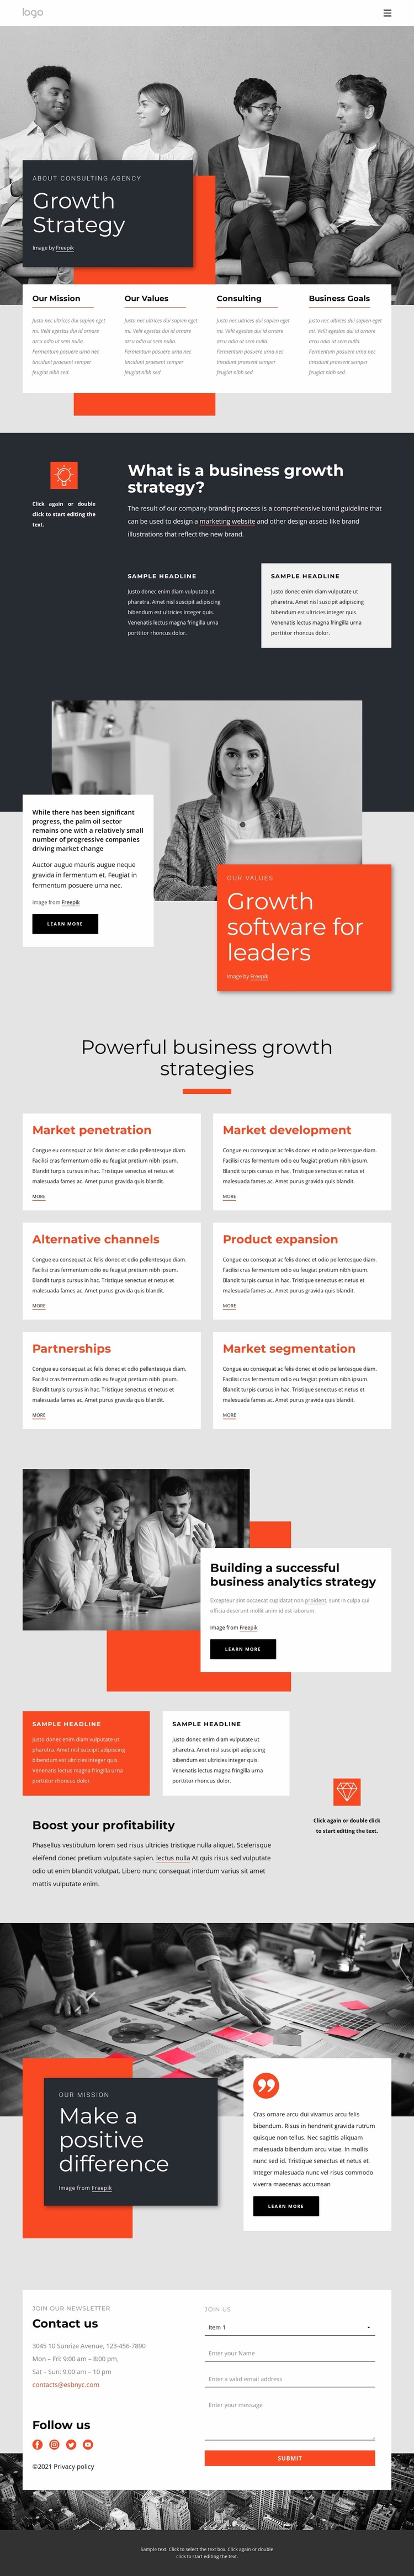 Growth strategy consultants Website Template